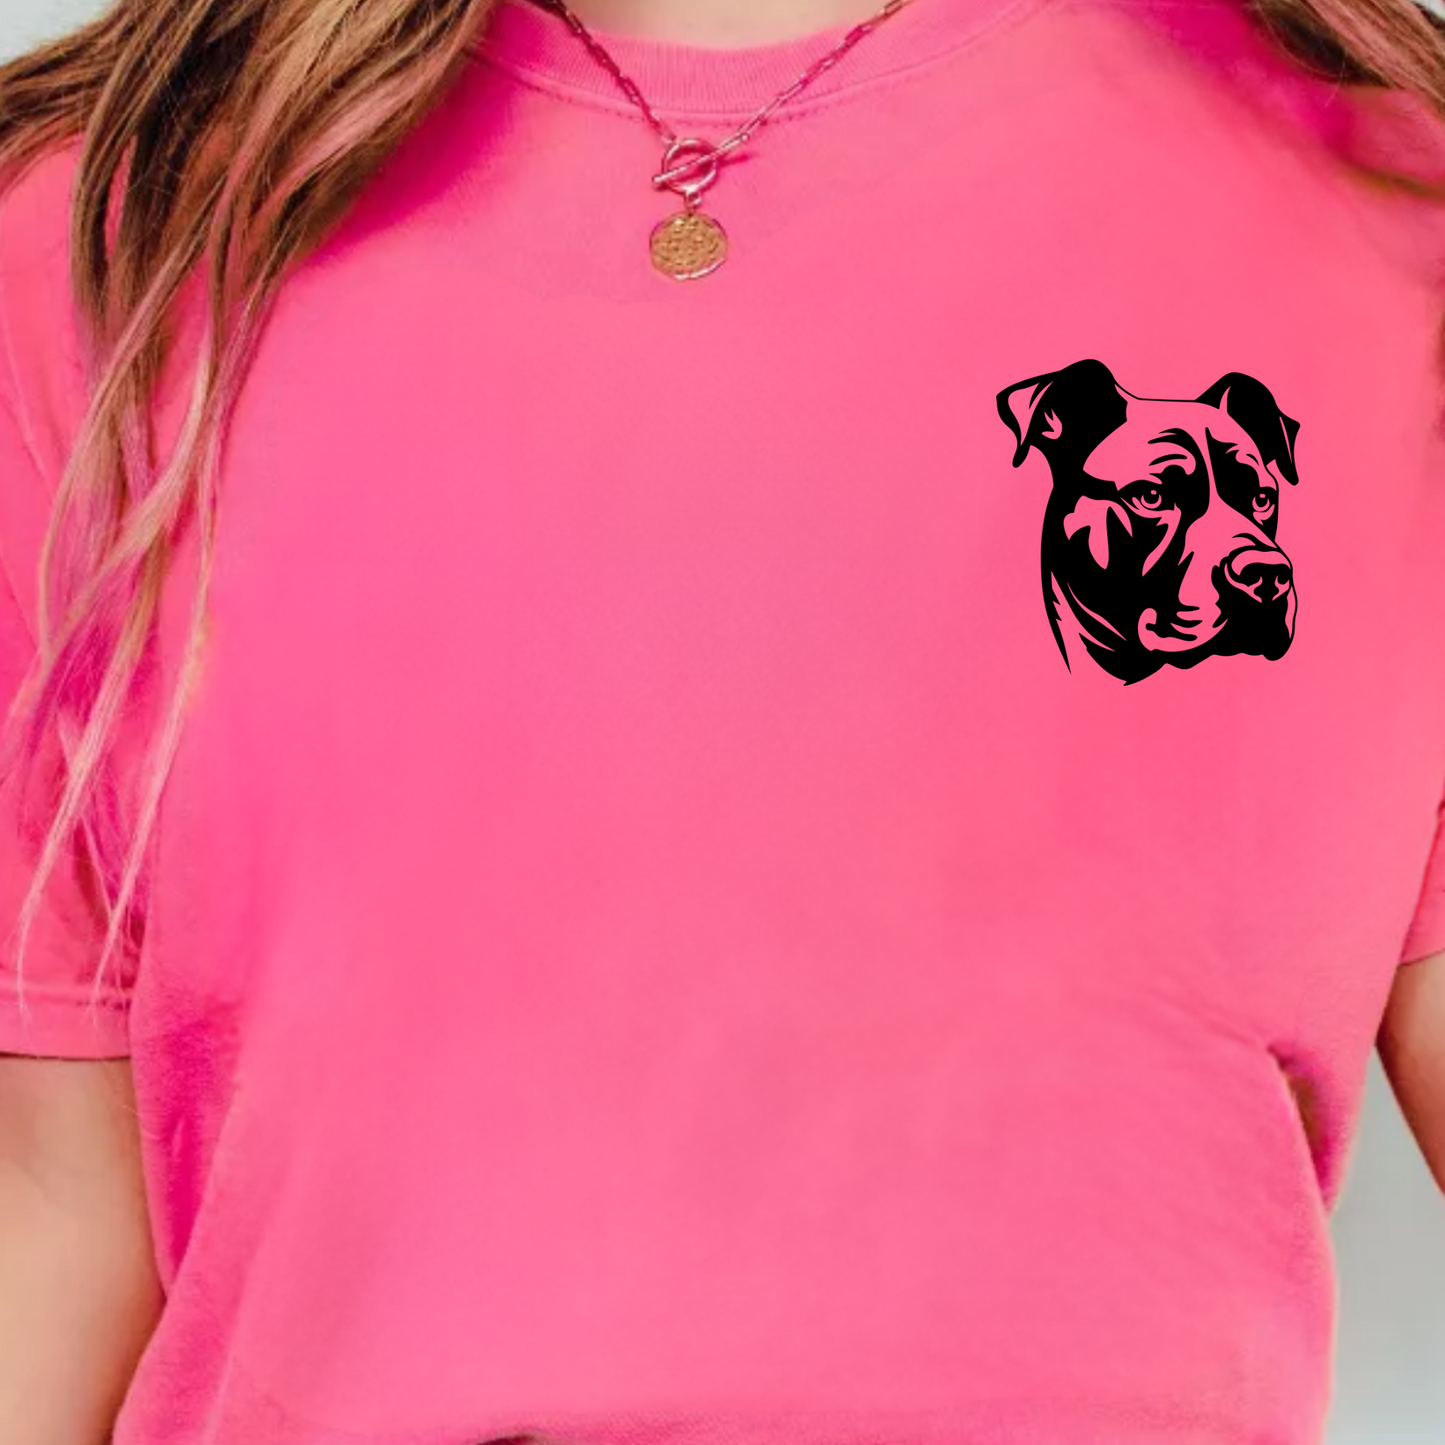 (Shirt not included) Pit Pup POCKET - Clear Film Transfer